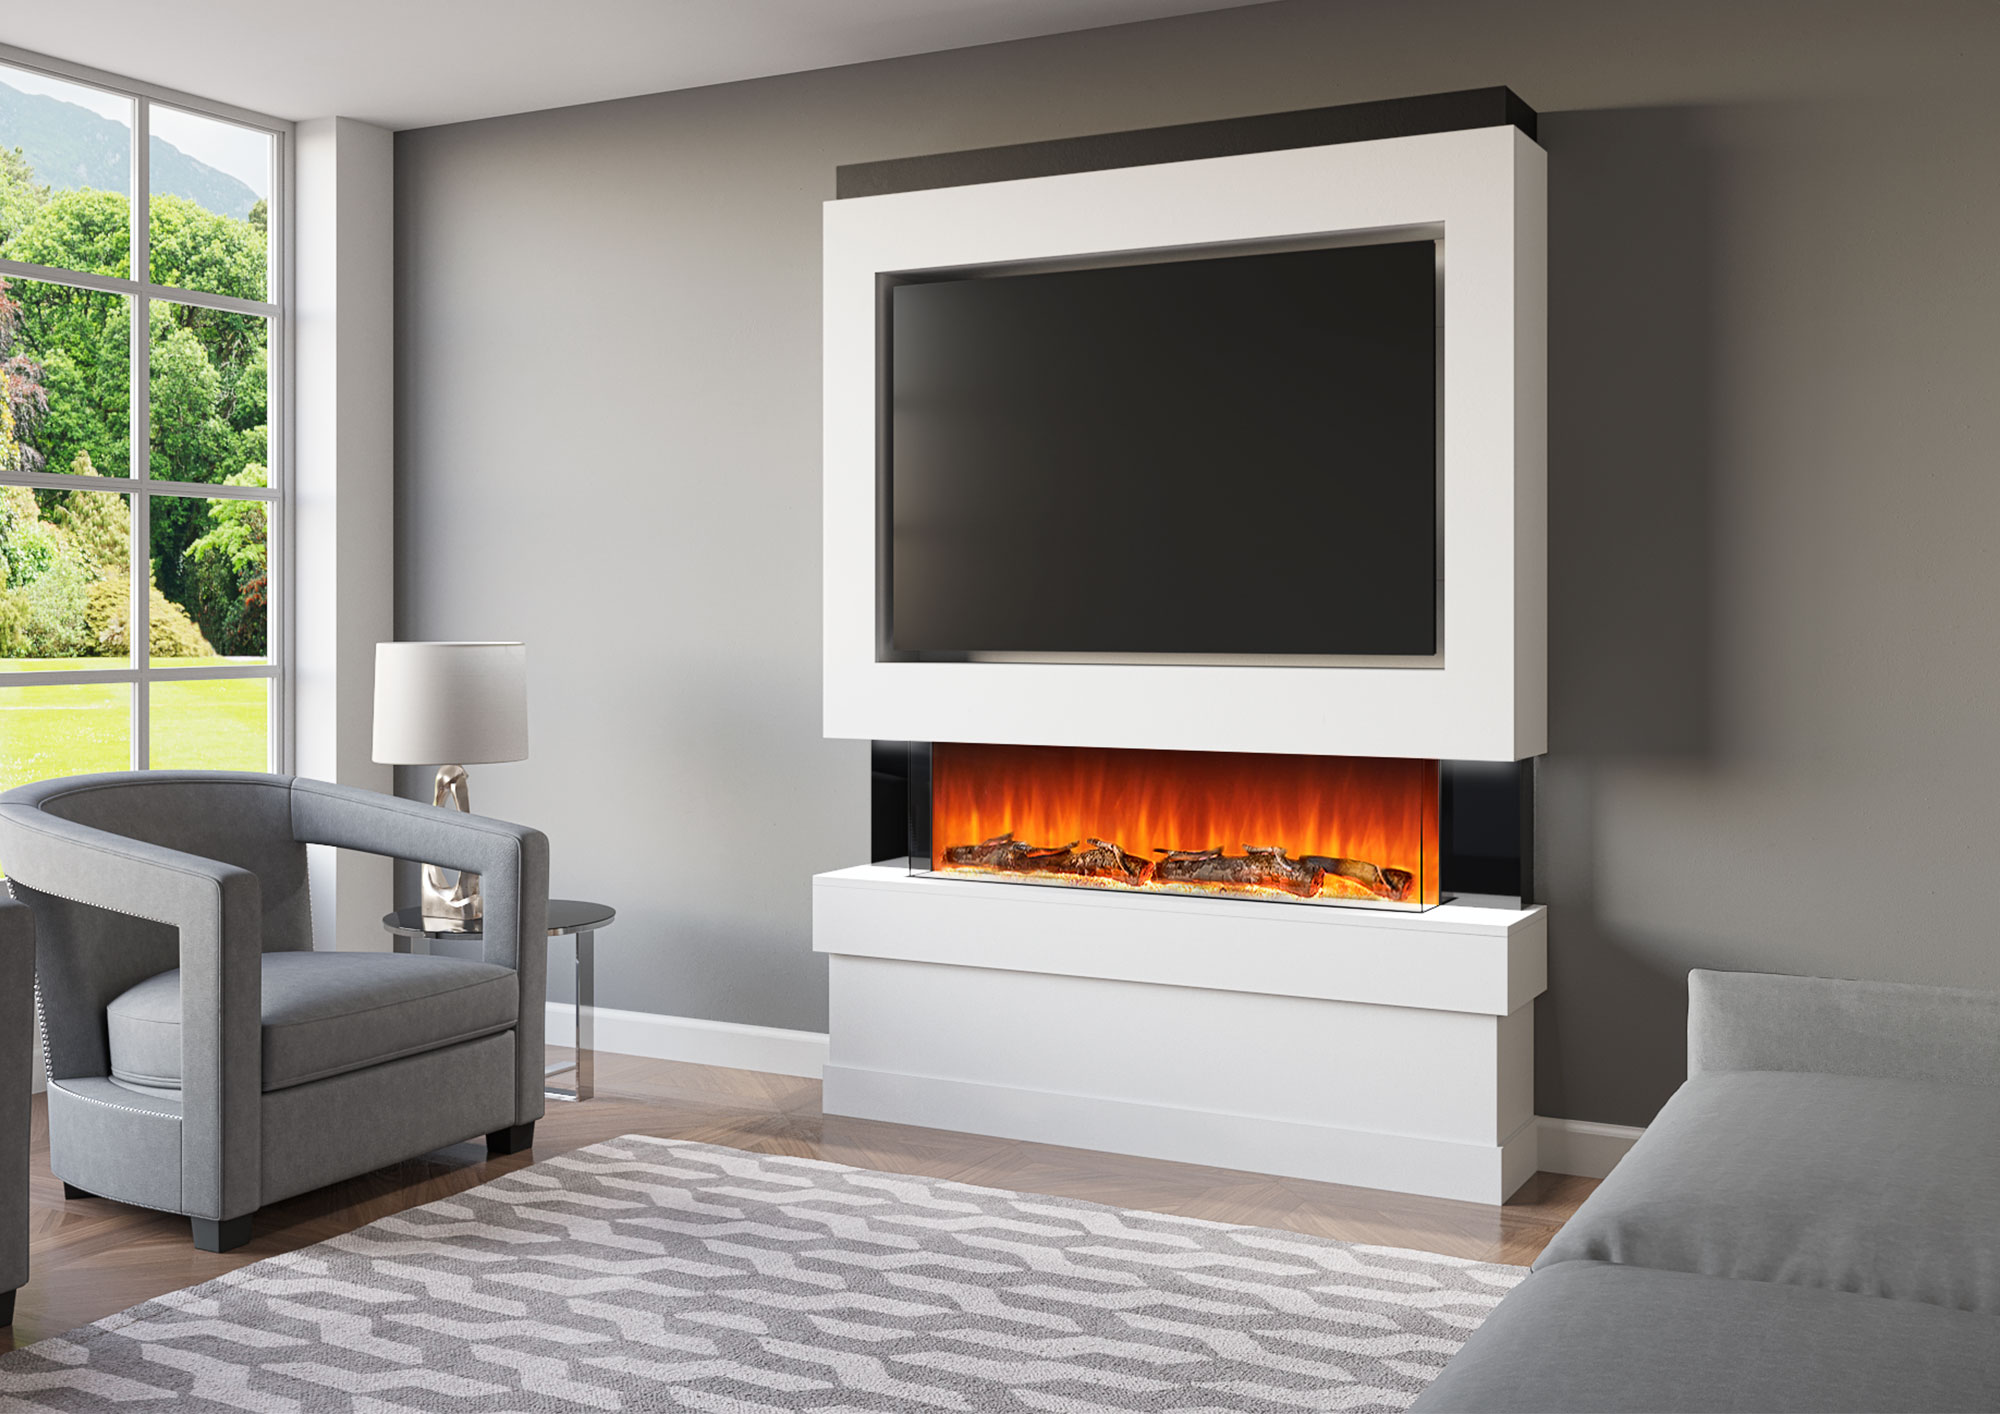 Vital Things to Know About Electric Fires Before Buying Them - EvolutionFiresuk